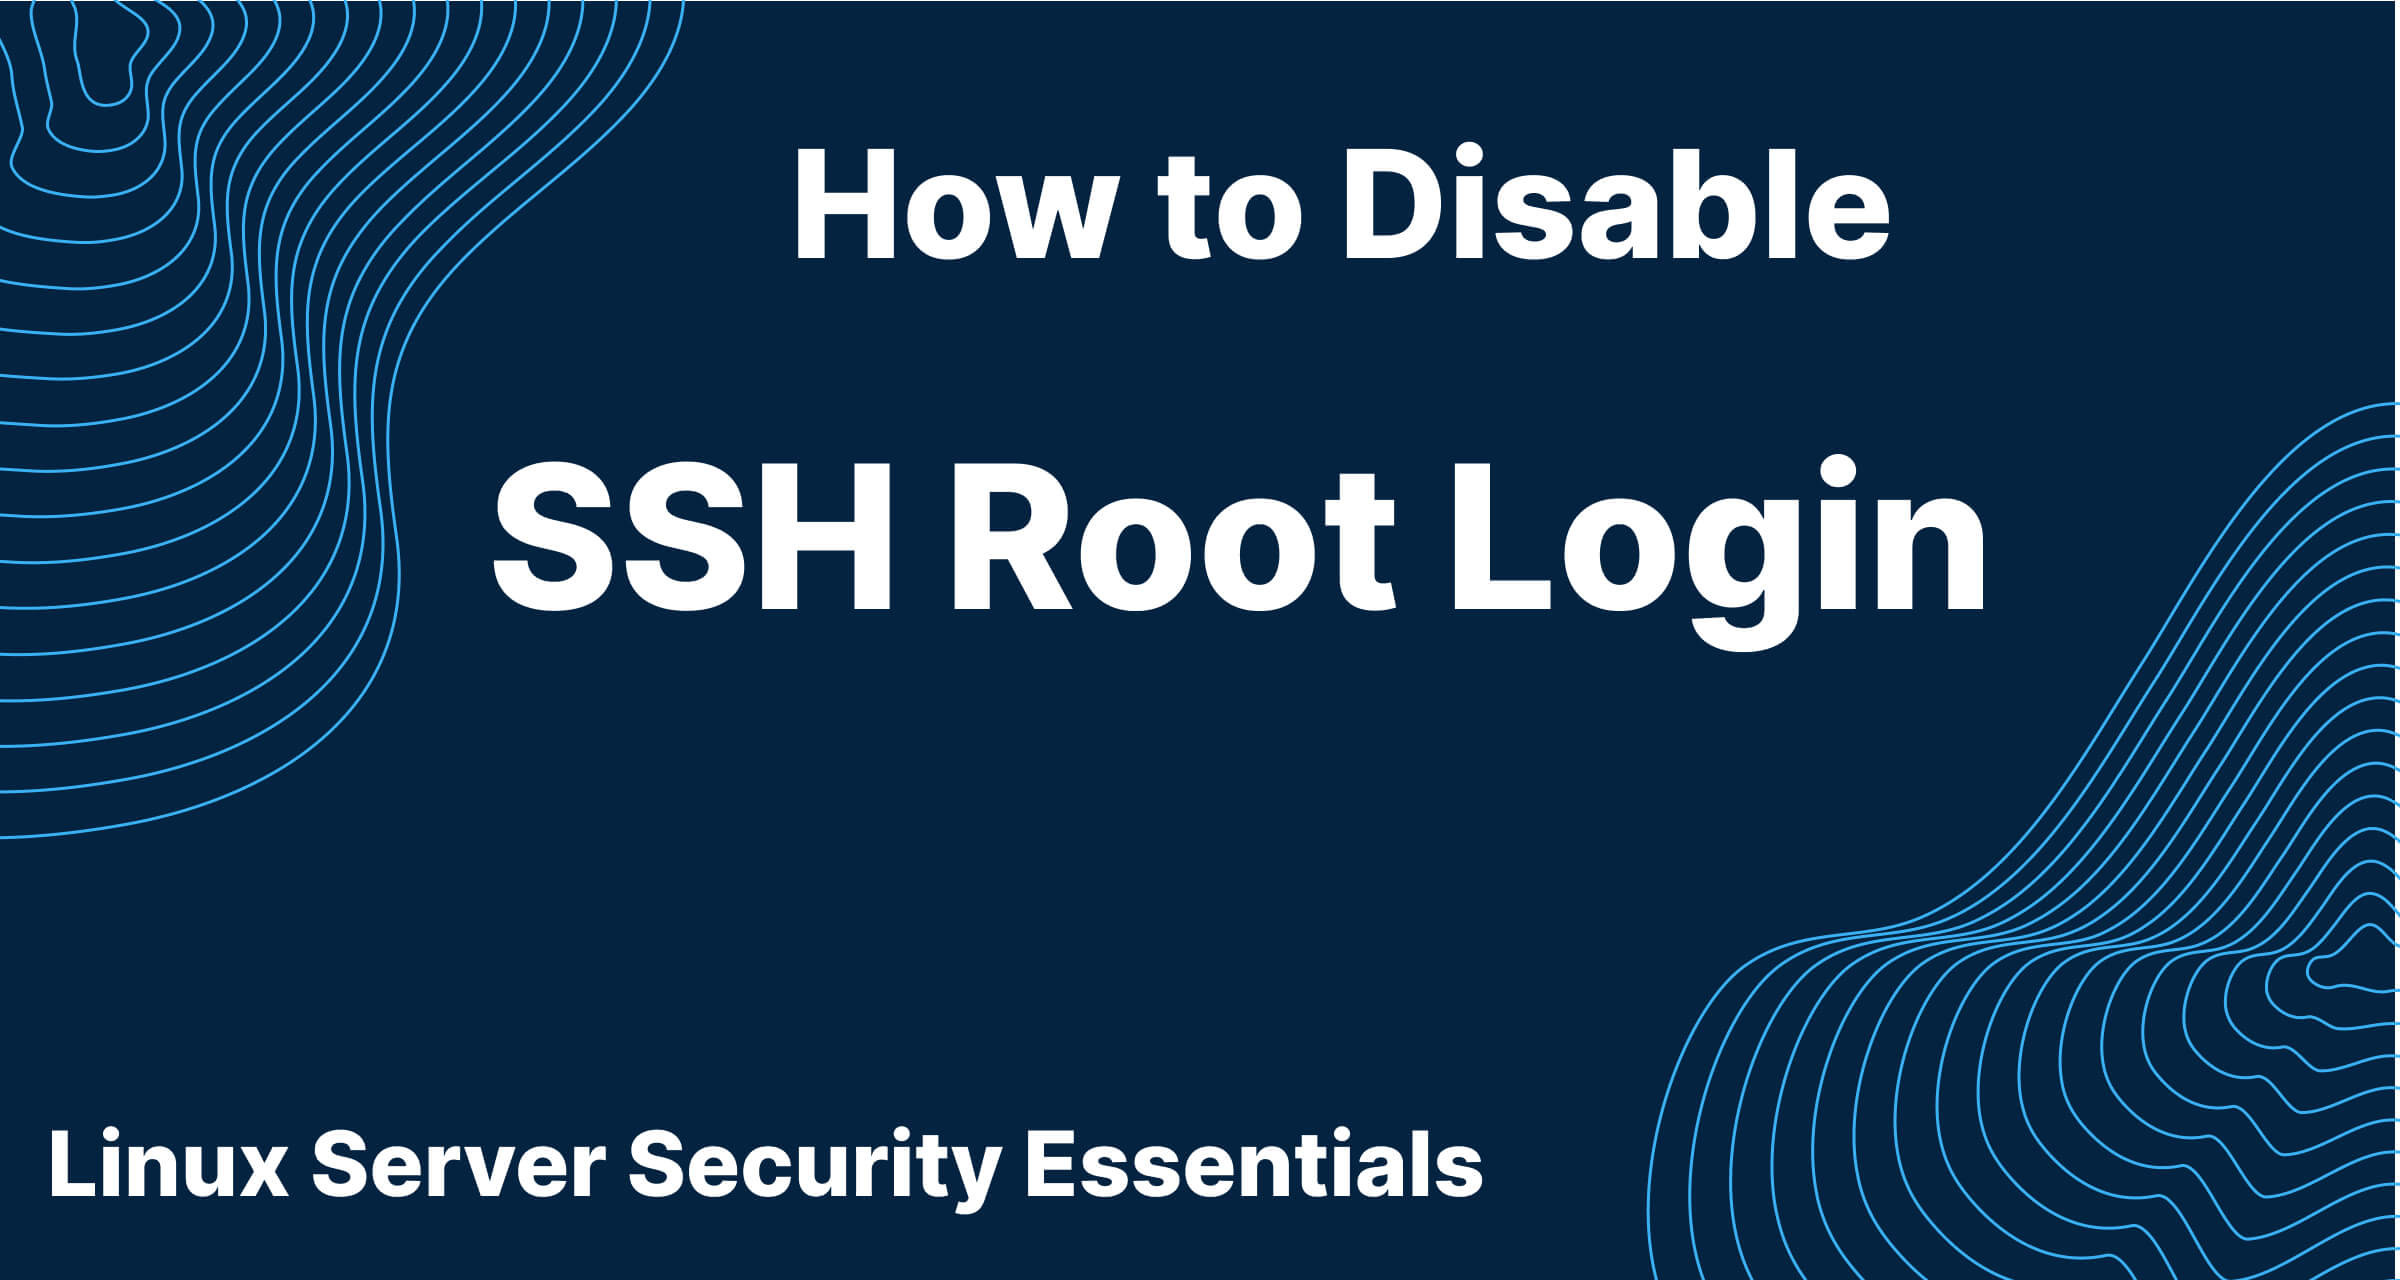 How to disable SSH root login on Linux